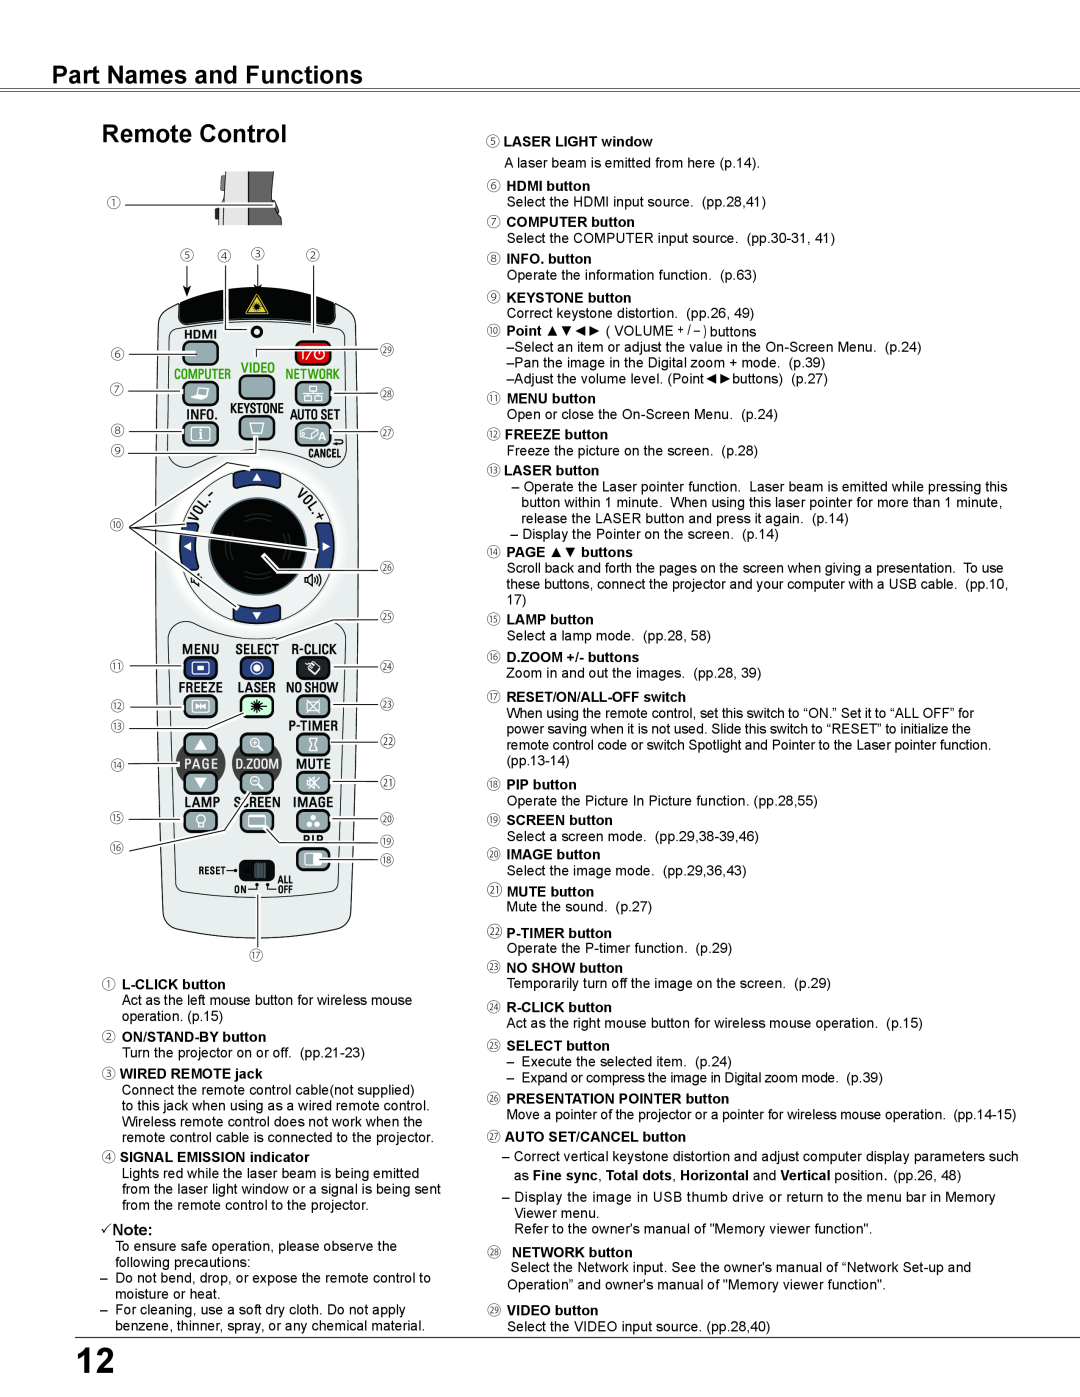 Sanyo WXU700A Part Names and Functions Remote Control, ⑤ Laser Light window, ⑥ HDMI button, ⑦COMPUTER button, ⑪MENU button 